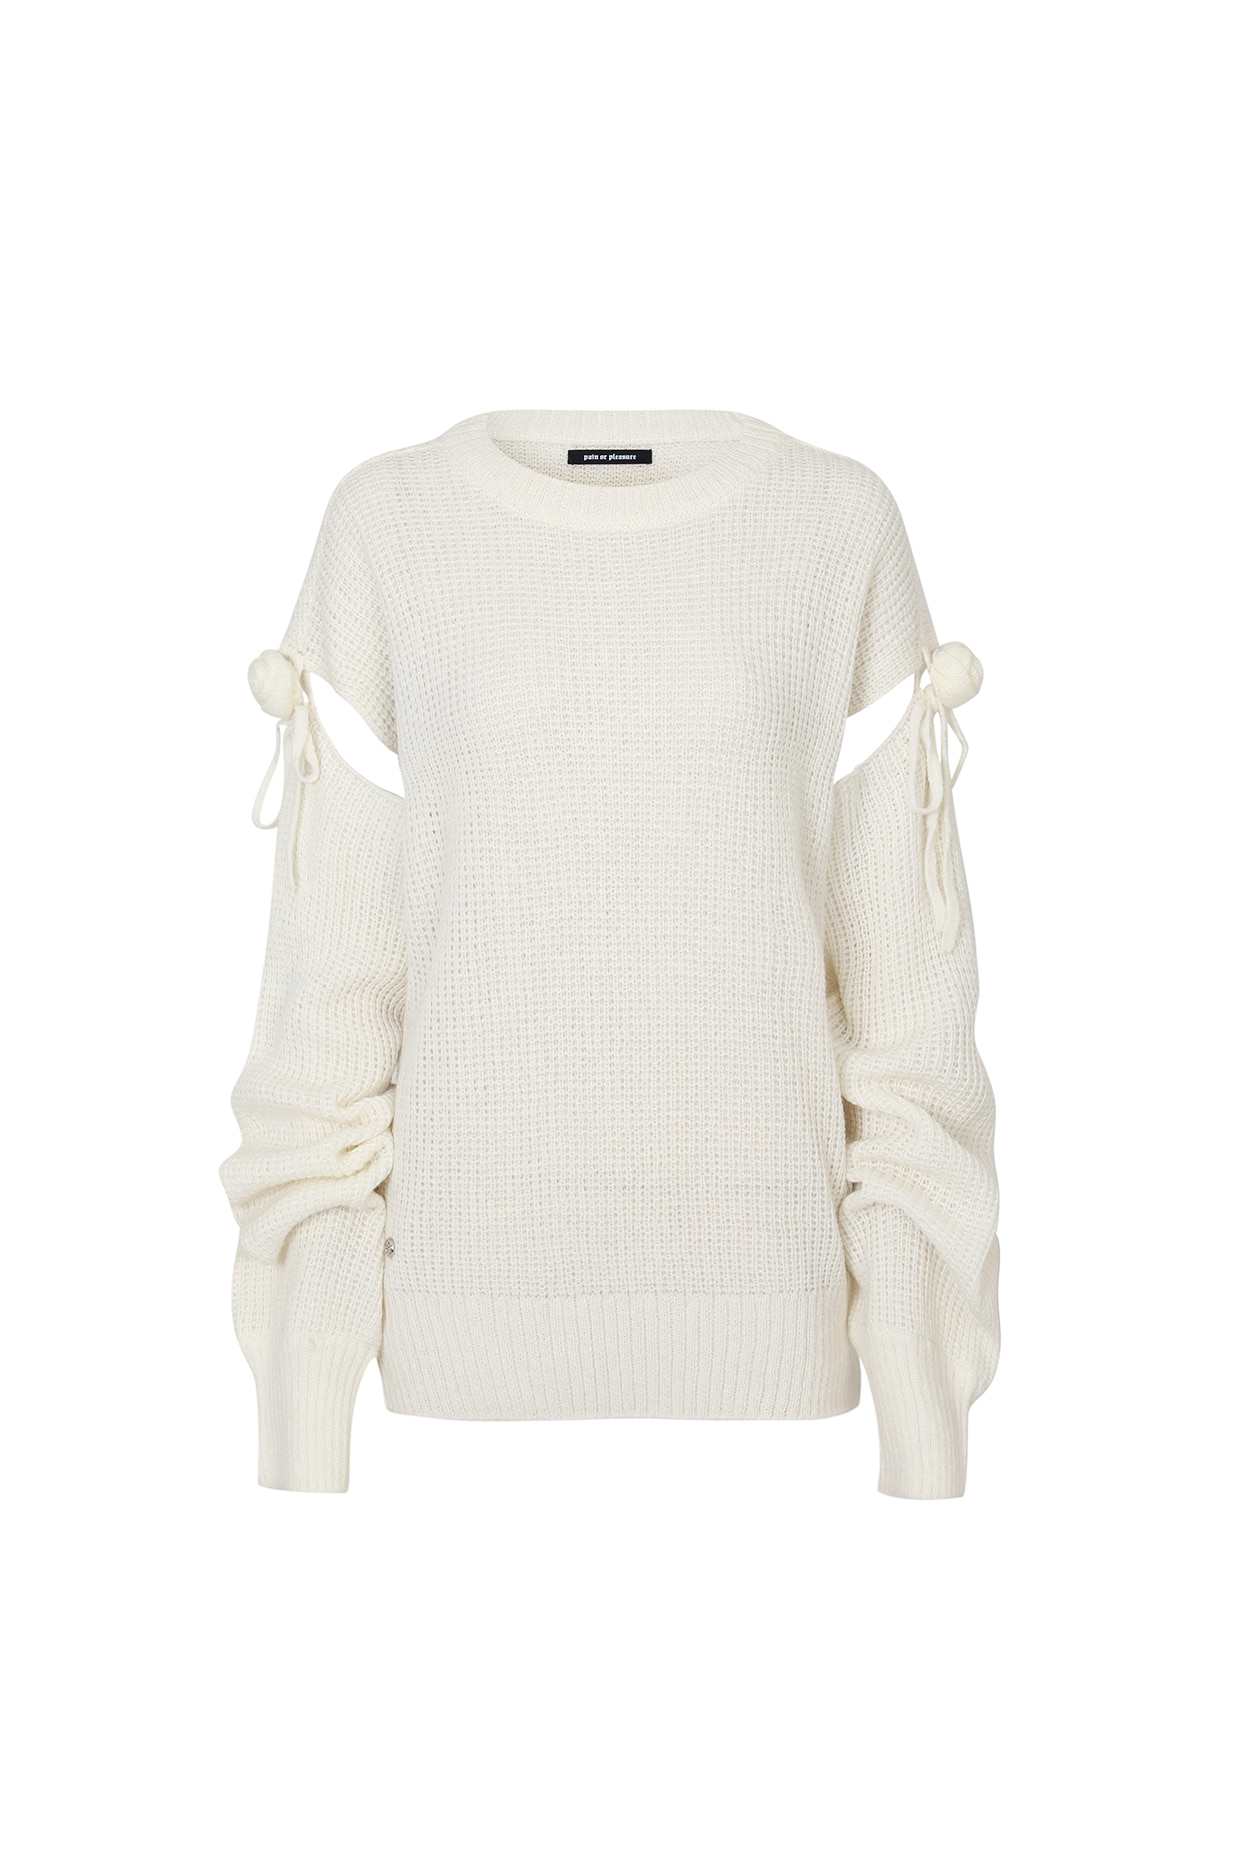 ROSE CUT OUT KNIT ivory